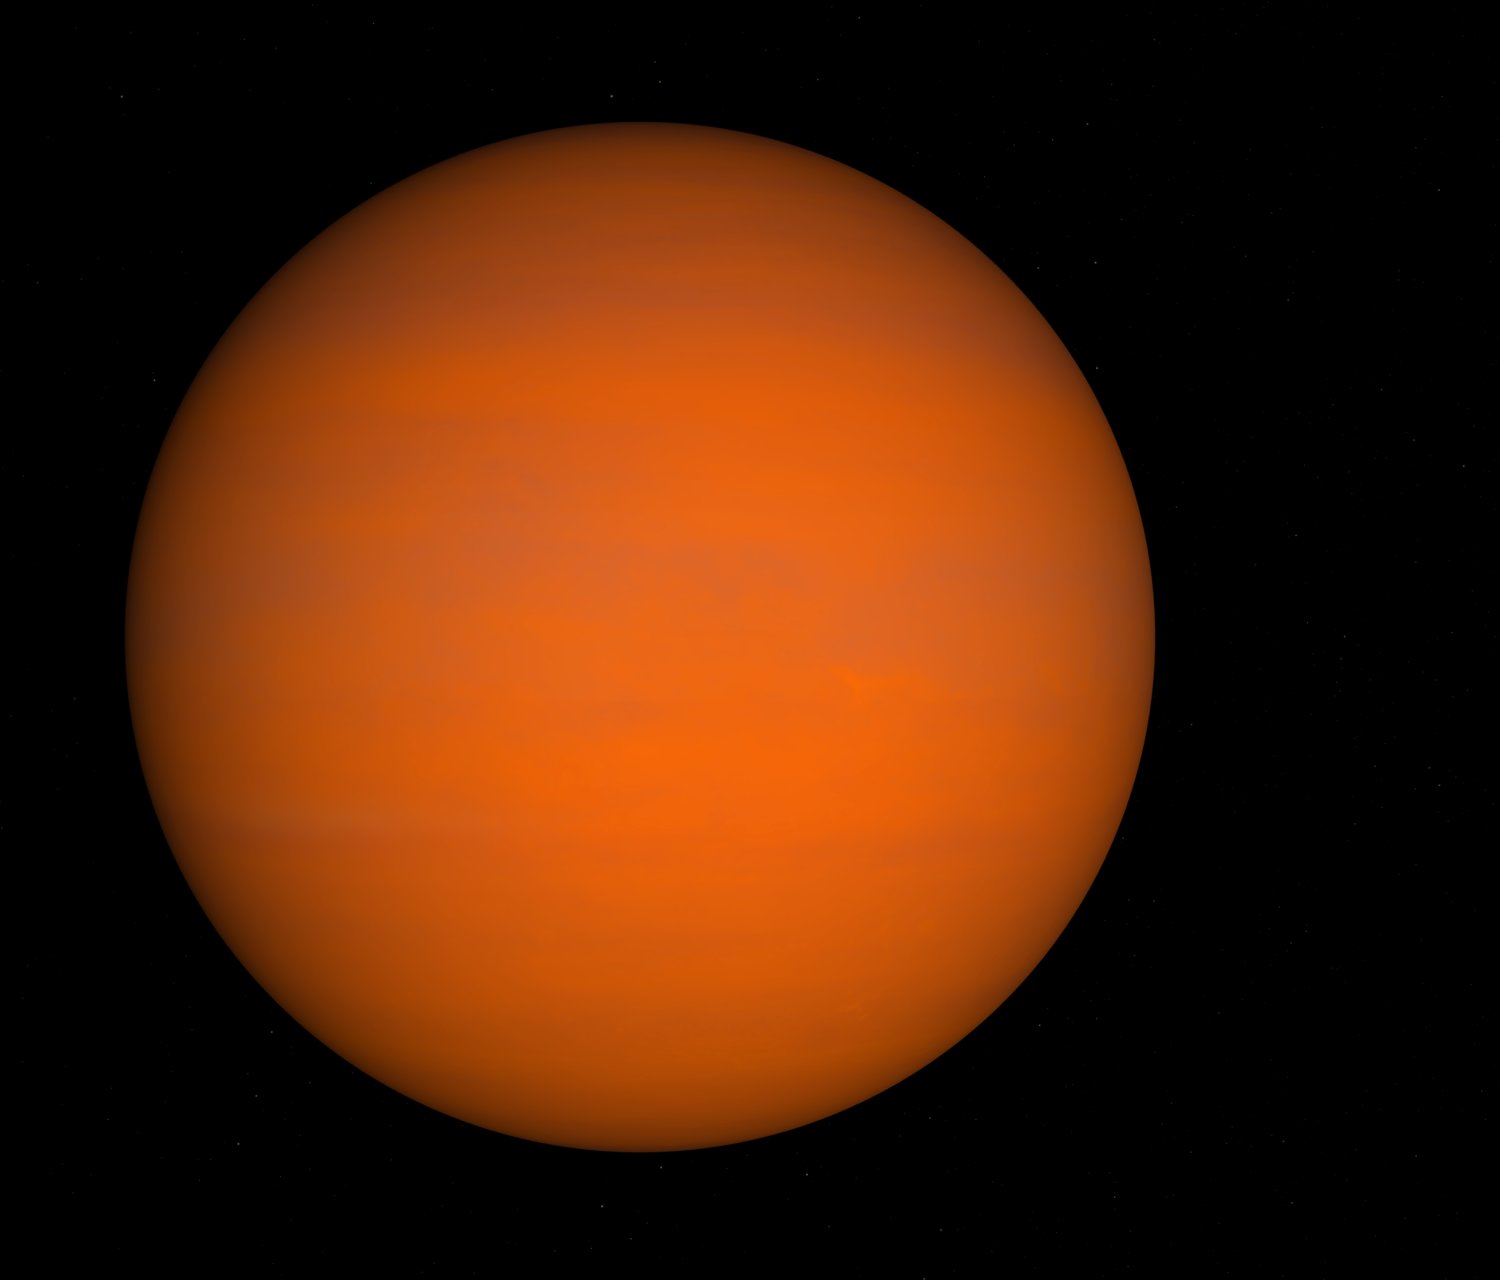 A hypothetical visualization of WASP-39 b, an exoplanet studied by the James Webb Space Telescope.